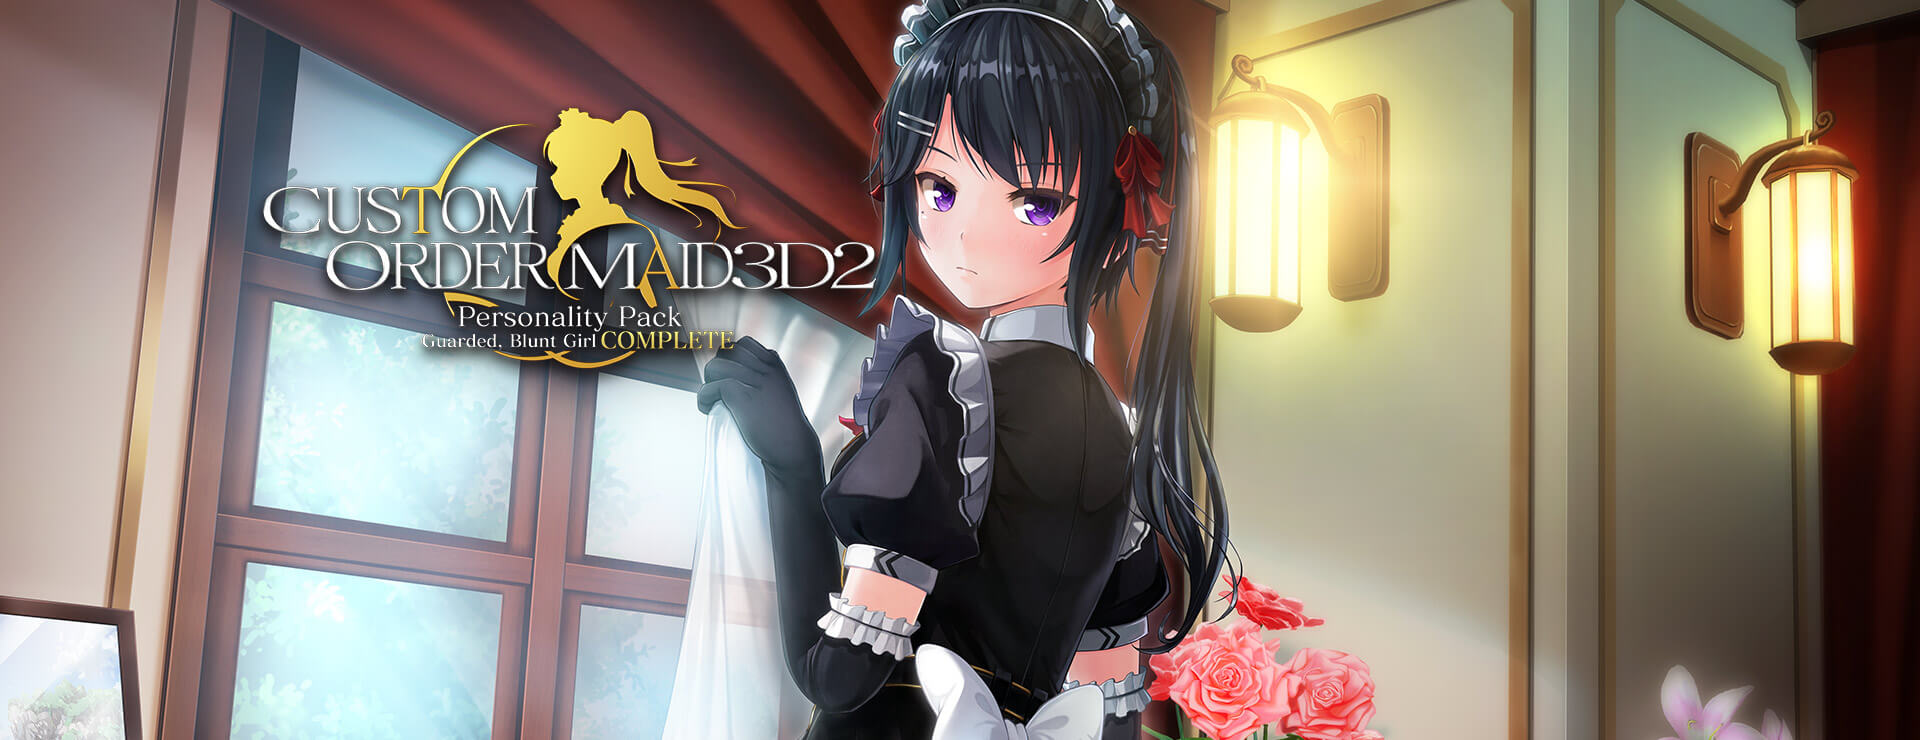 Custom Order Maid 3D2 Guarded, Blunt Girl Complete Bundle - Symulacja Gra